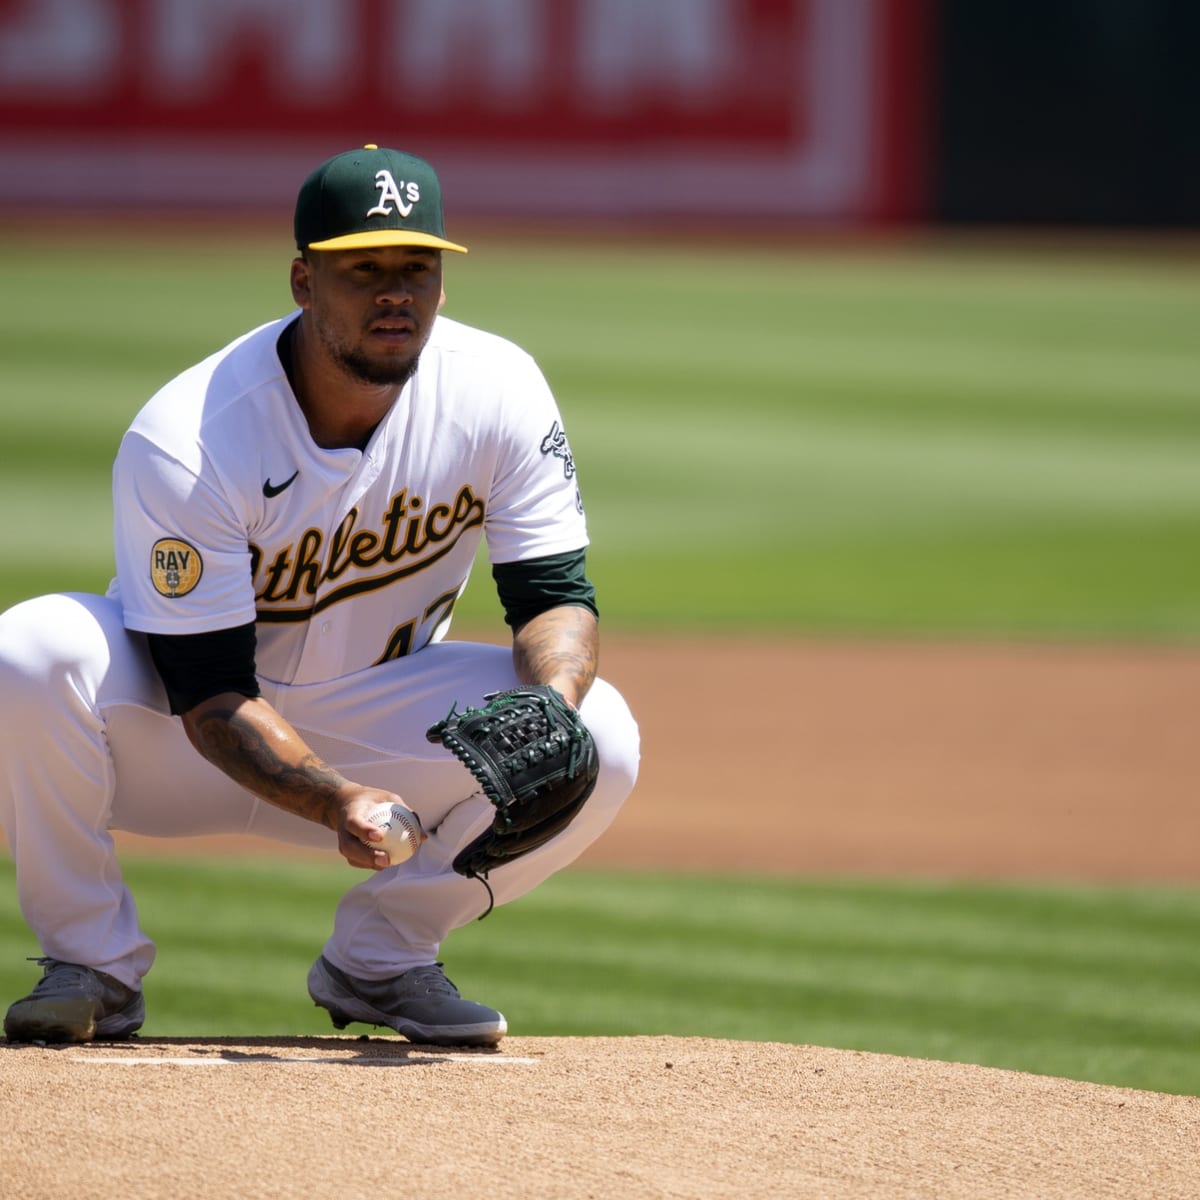 Frankie Montas dealt to Yankees in blockbuster trade with Athletics